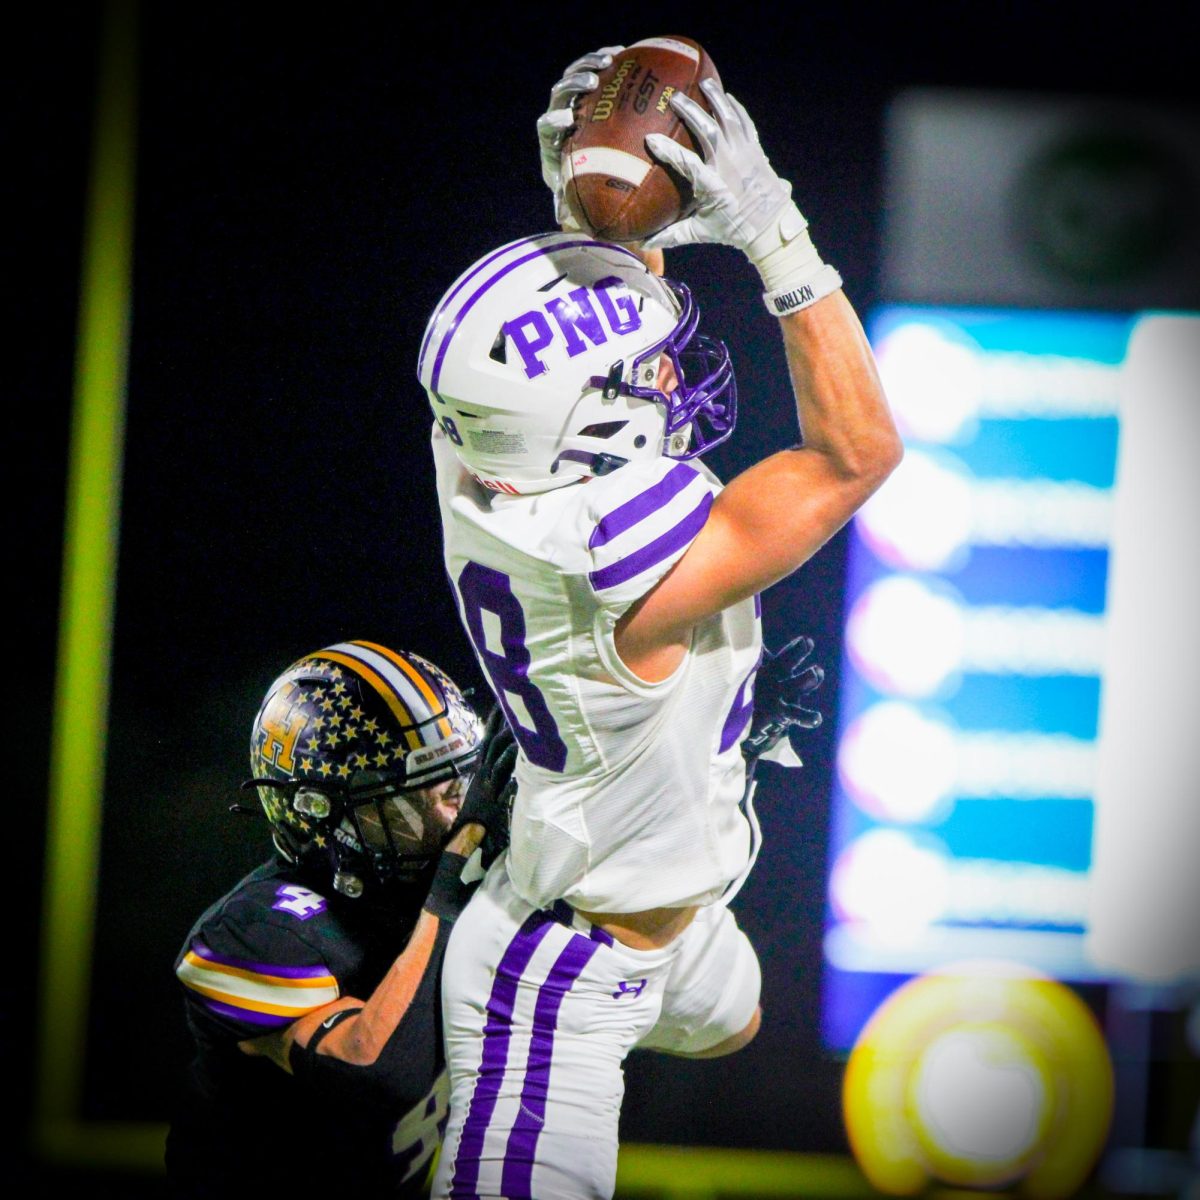 Sailing toward the sideline, varsity wide receiver Reid Richard grips a pass from quarterback Conner Bailey (26) midway through the third quarter of the teams Class 5A state semifinal game with Liberty Hill on Friday, Dec. 8 at the Berry Center in Cypress. 

Though he caught the pass, Richard landed out of bounds and the pass was ruled incomplete. 

PNG stayed ahead of Liberty HIll through the remainder of the game and won, 42-35, to advance to the state championship game for the second year in a row. (Celia Ruiz/NDN Press)